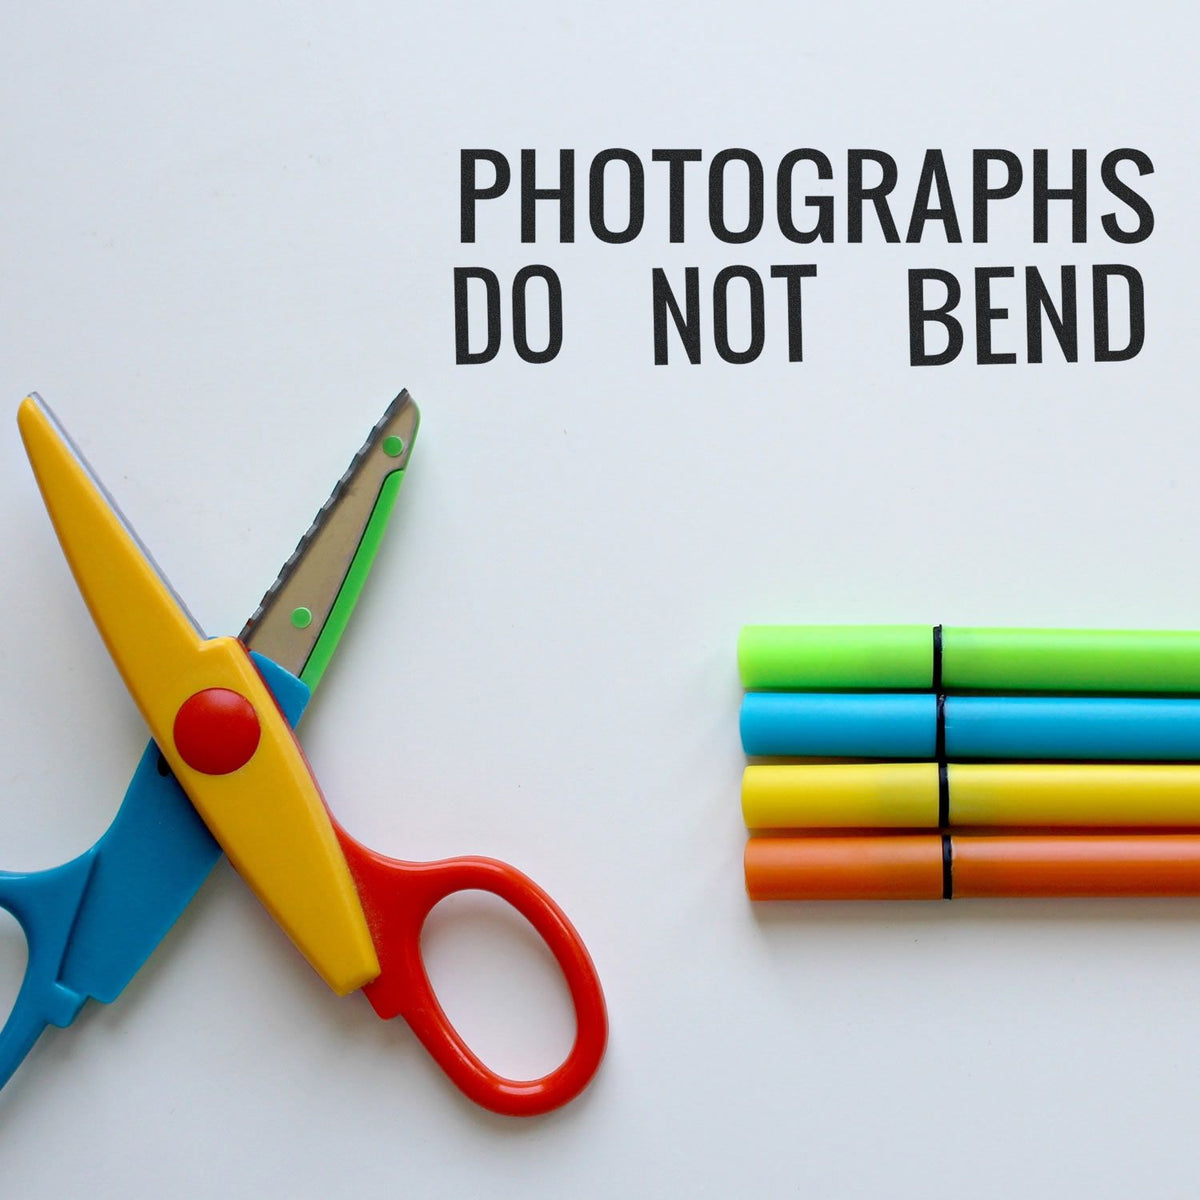 Large Photographs Do Not Bend Rubber Stamp Lifestyle Photo